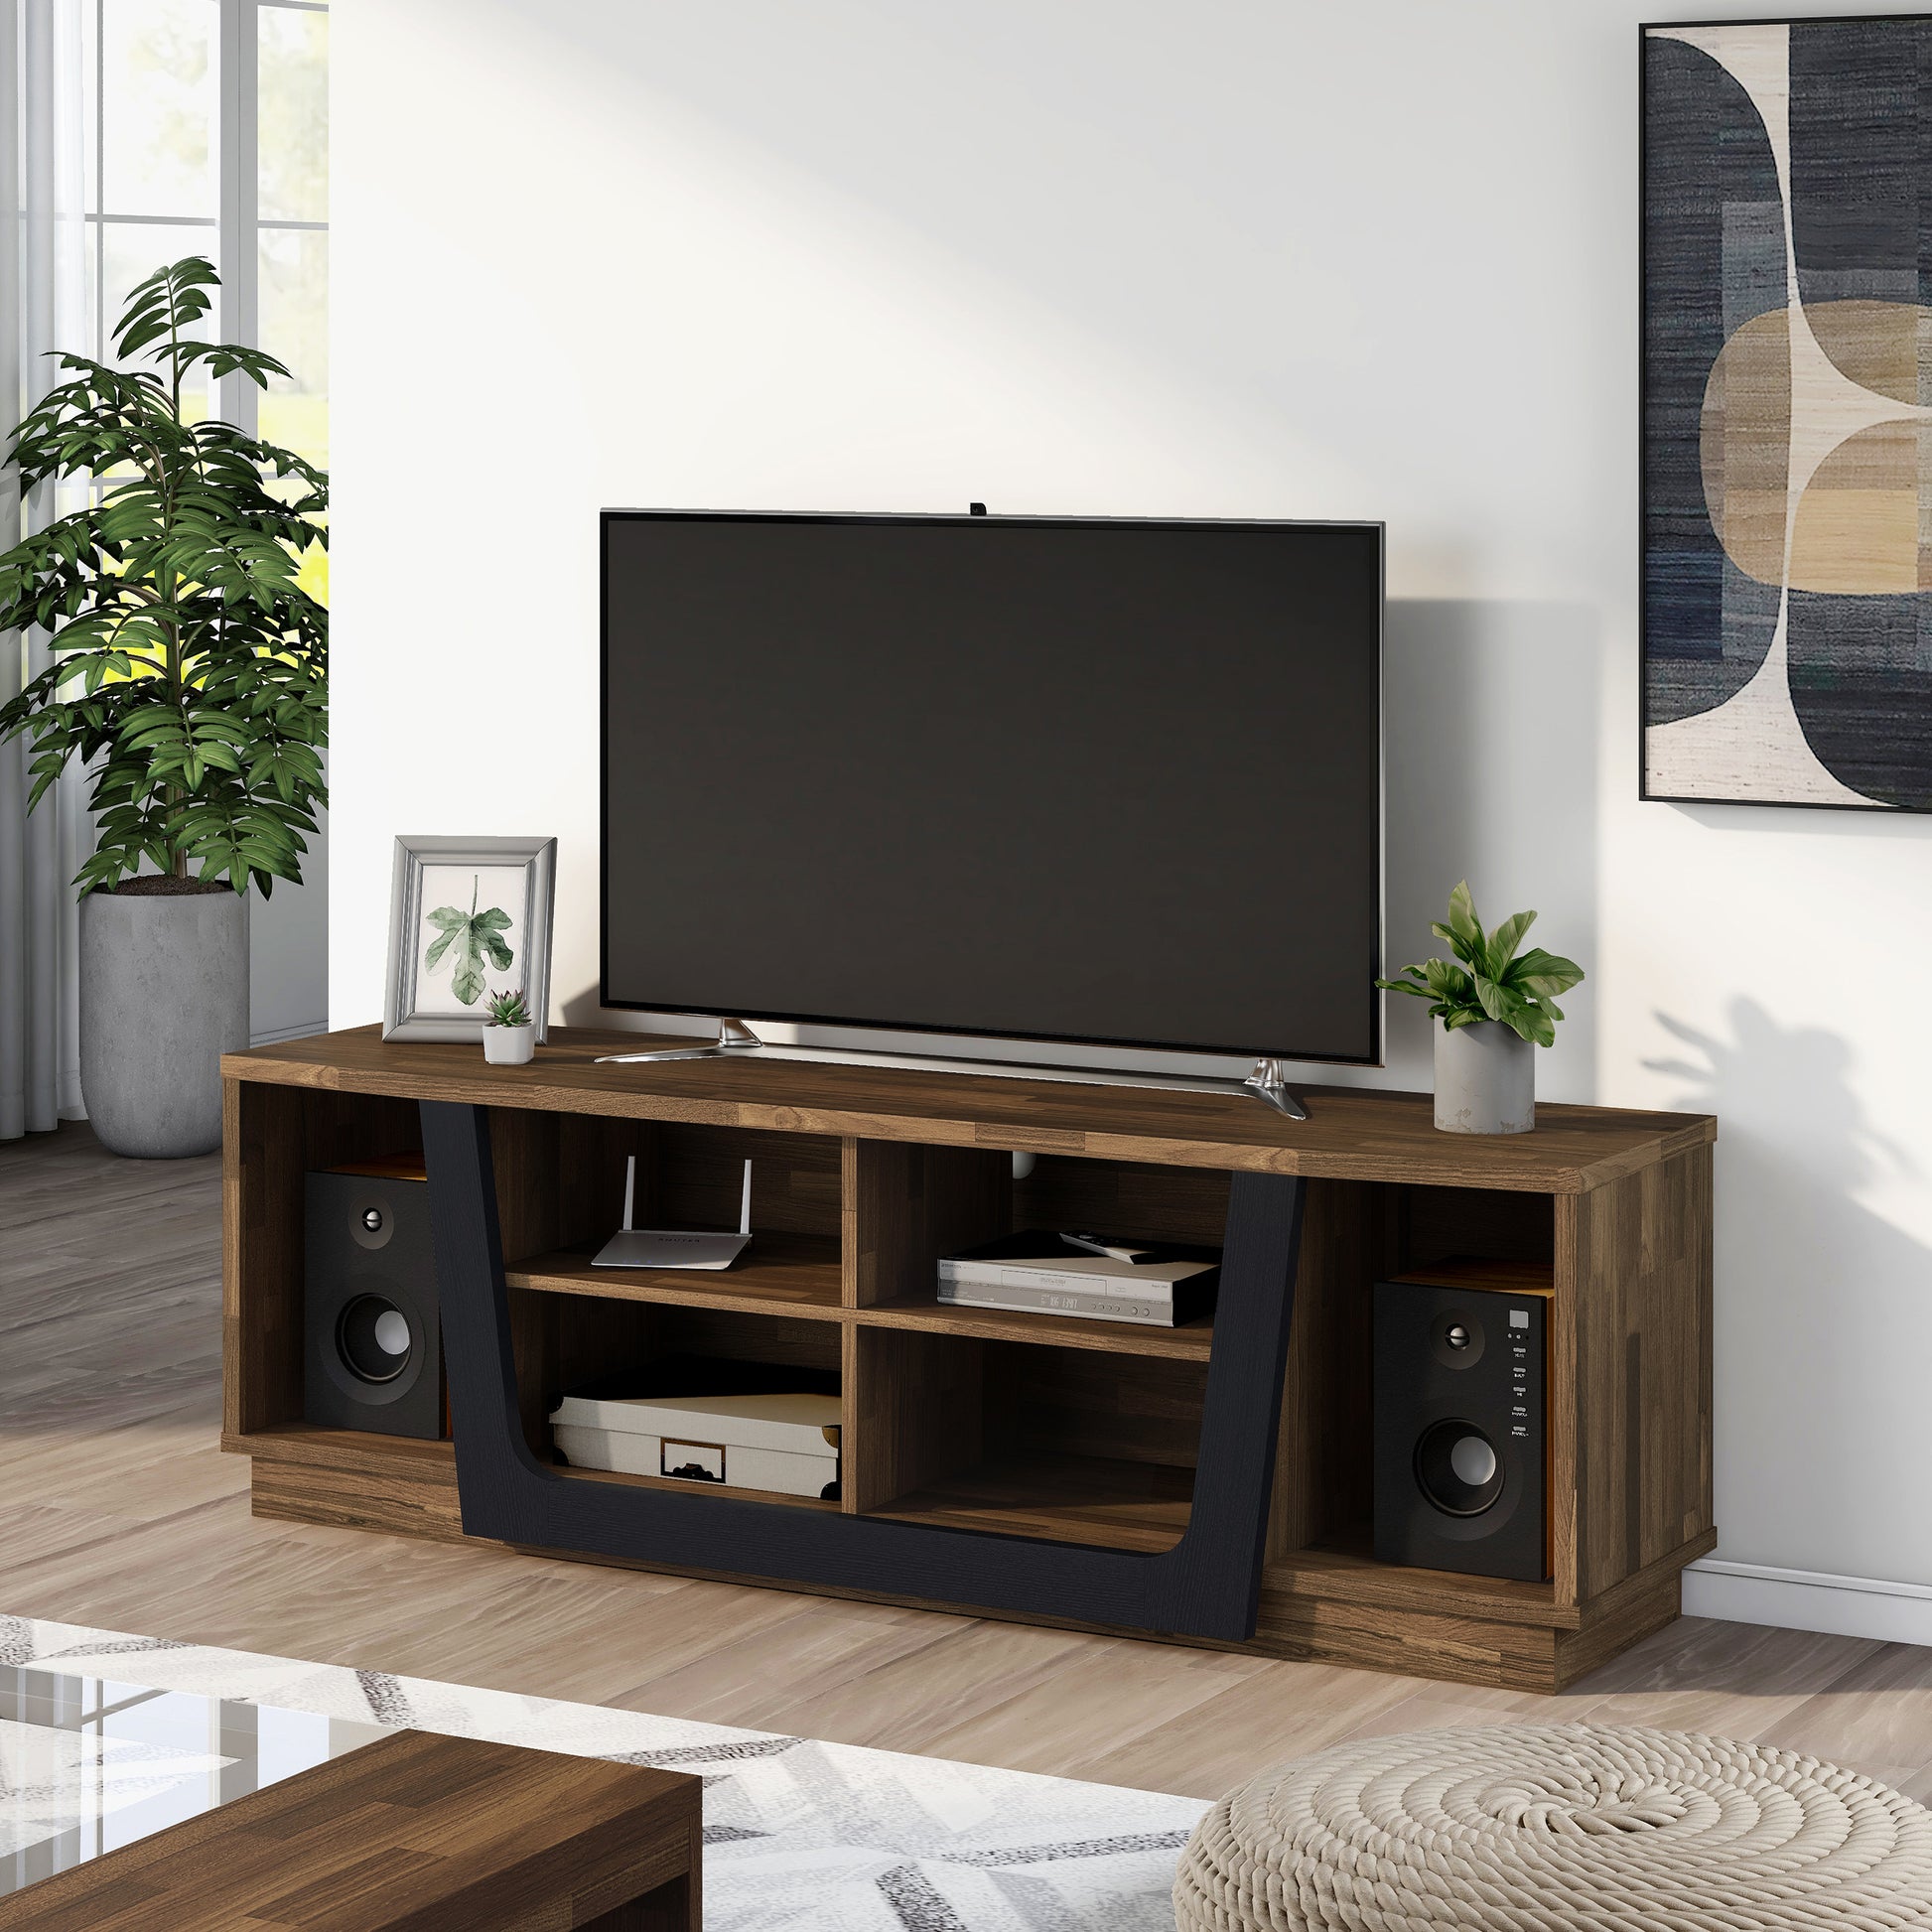 Left angled contemporary light hickory and black six-shelf TV stand in a living room with accessories